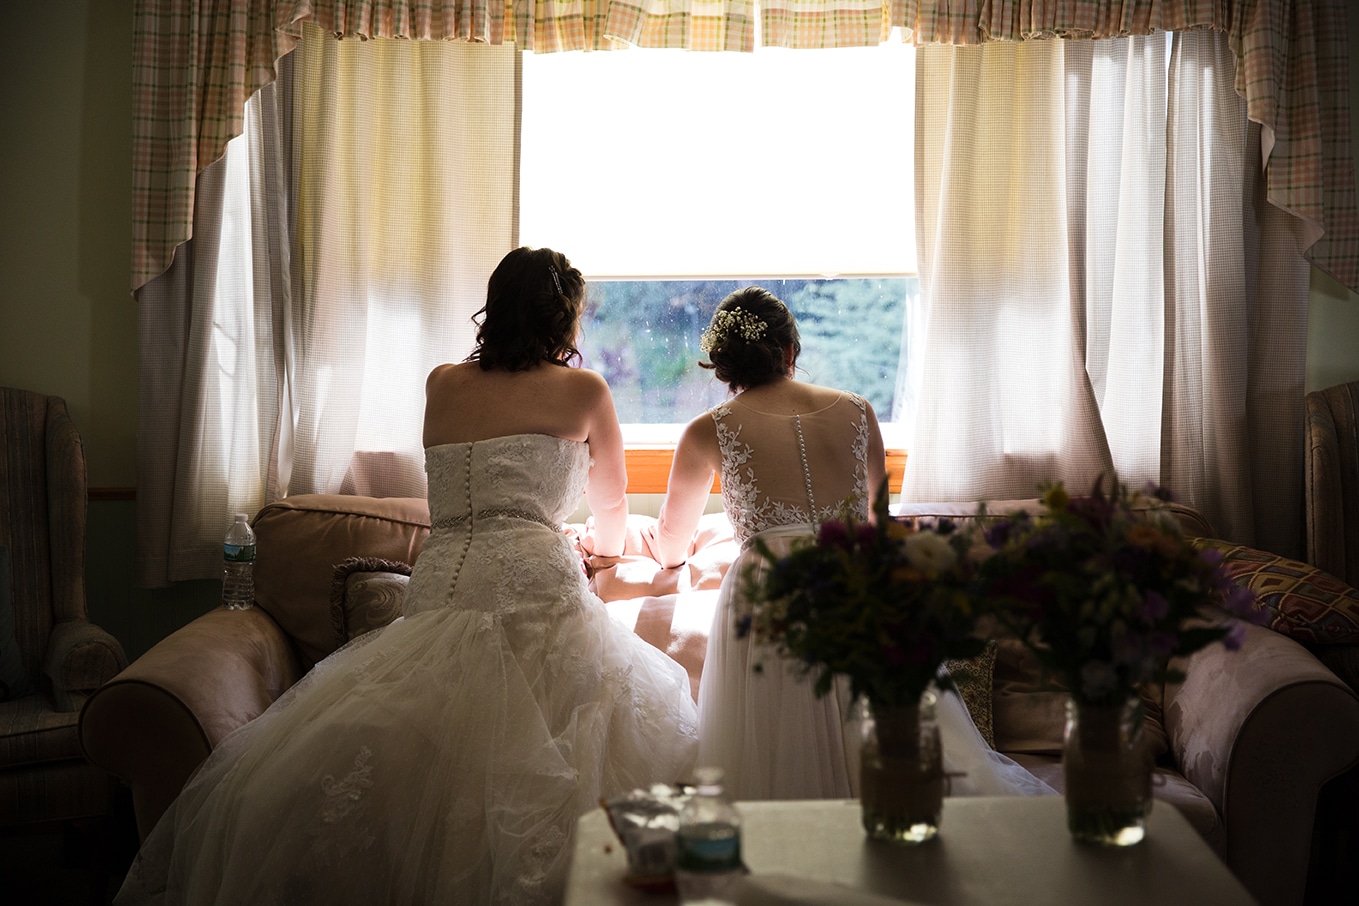 This documentary photograph of two brides watching their guests arrive is one of the best wedding photographs of 2016